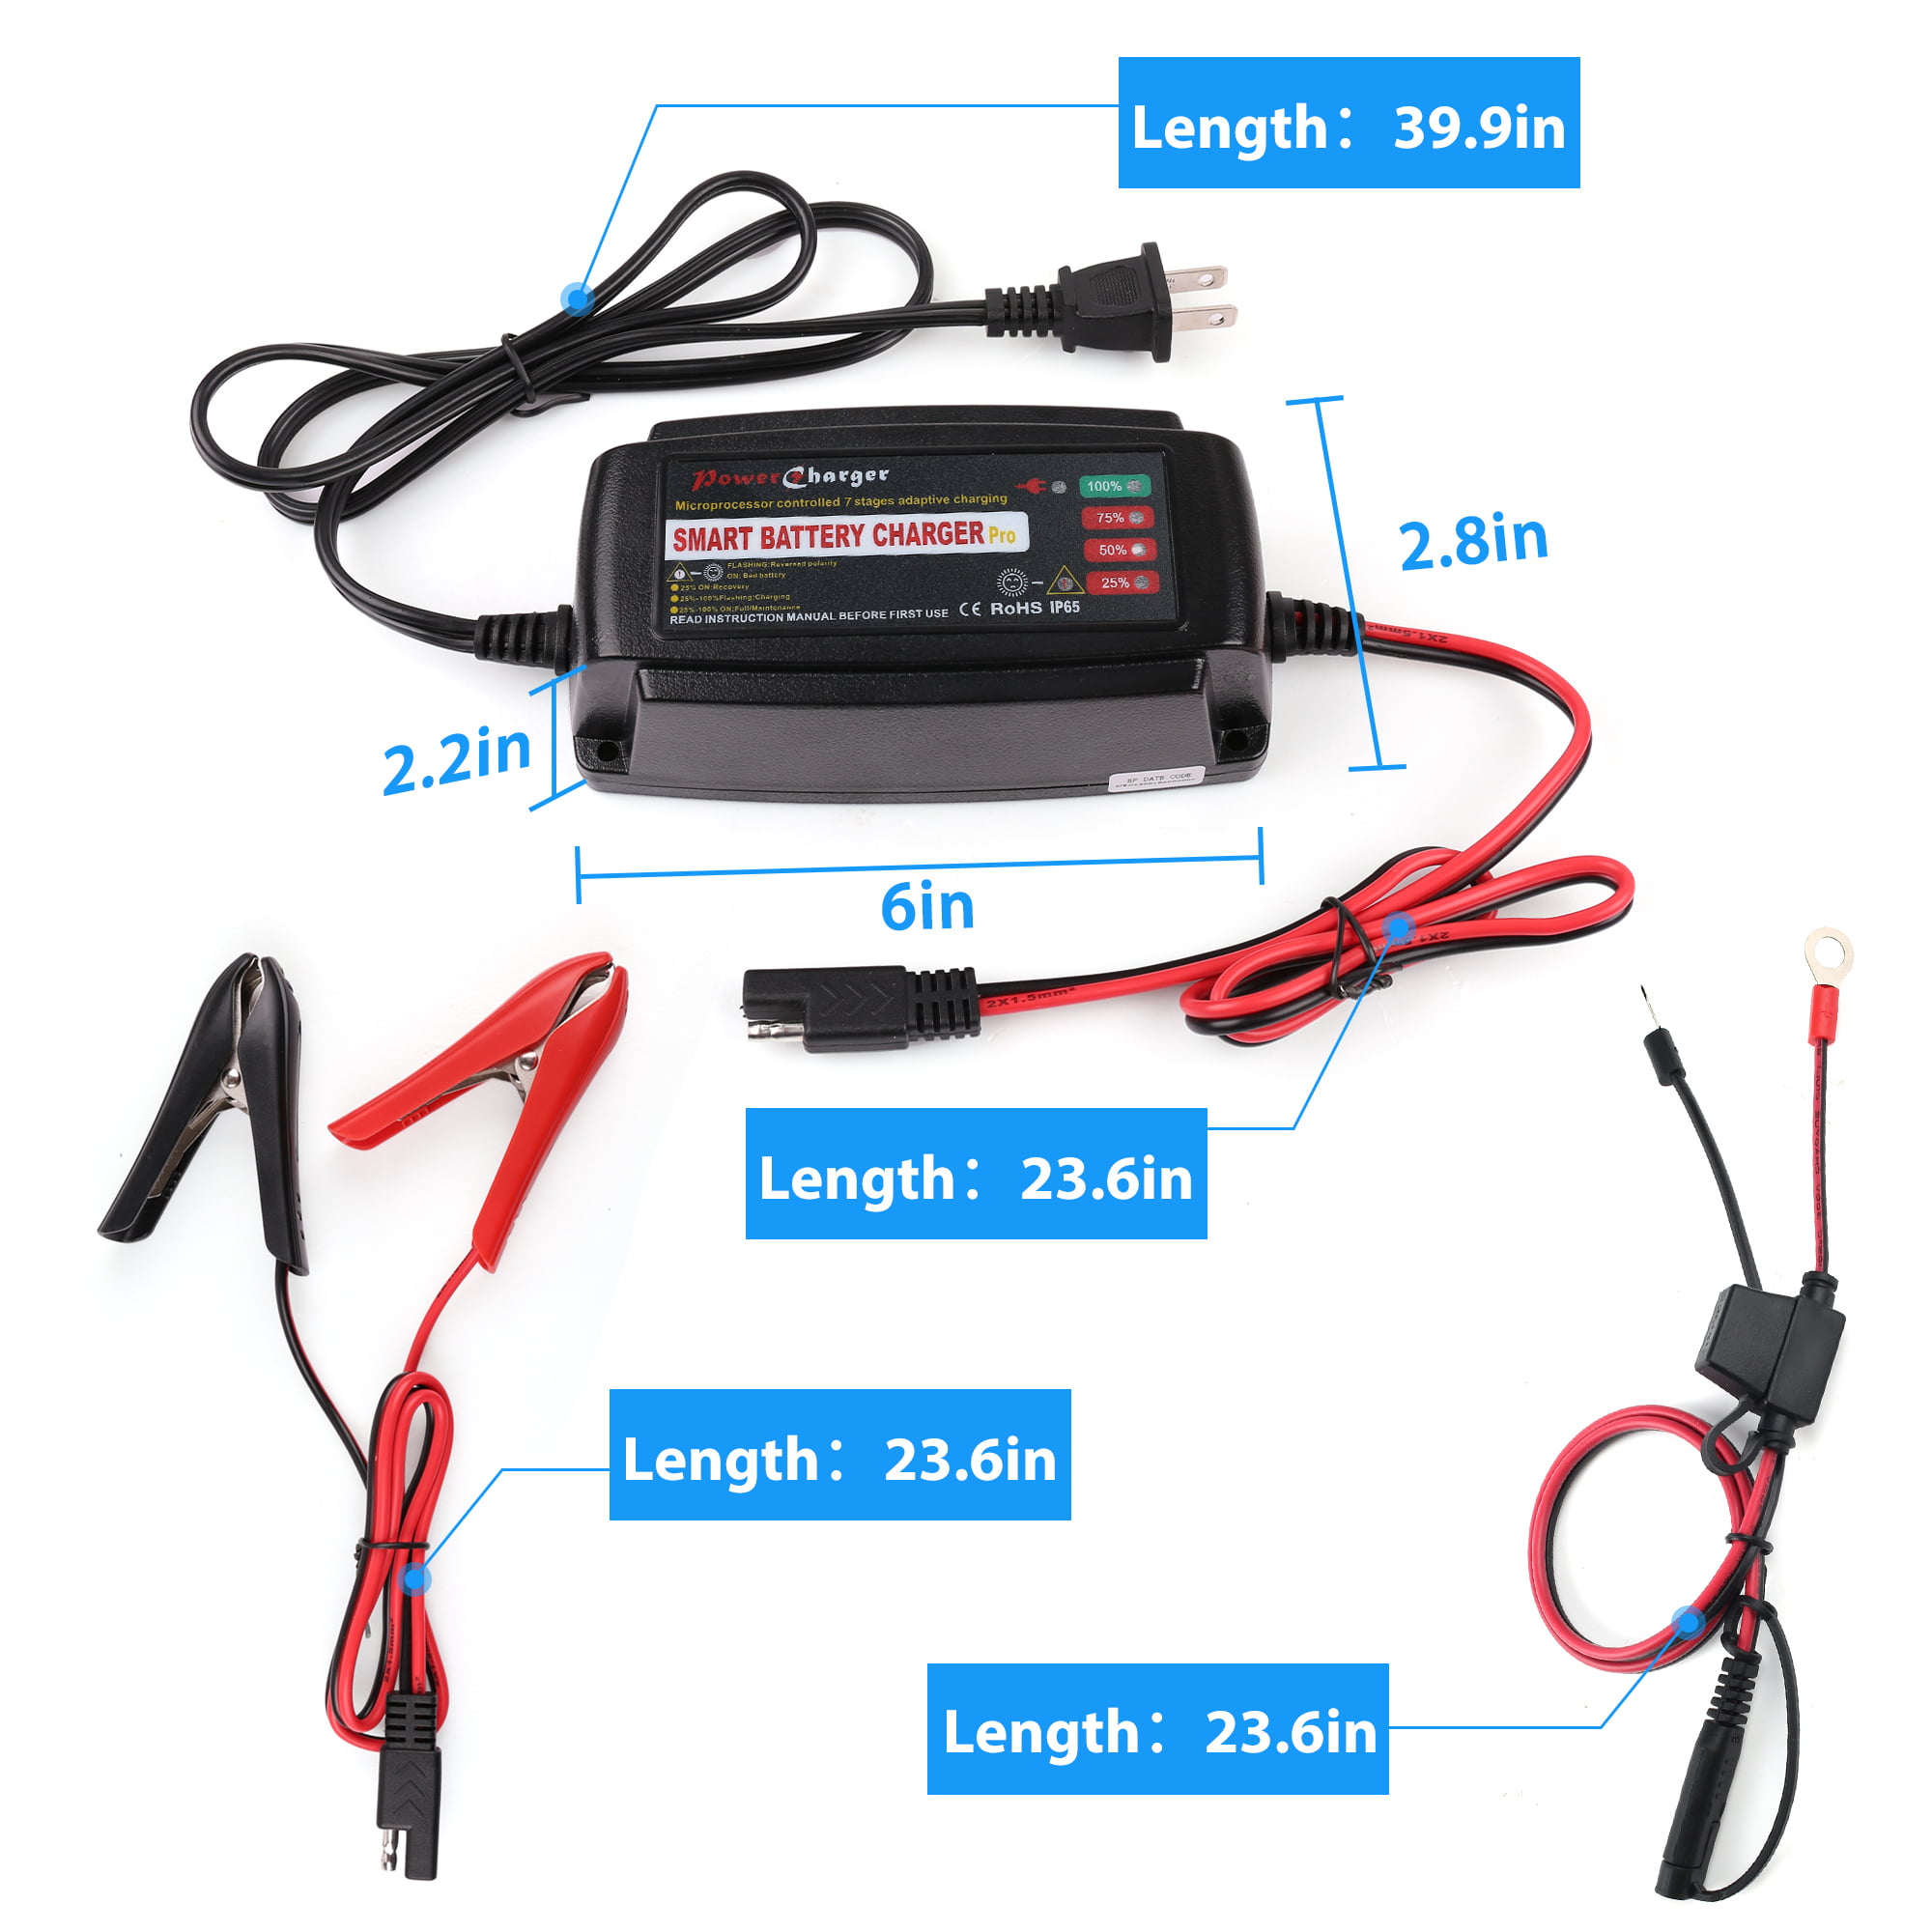 12V 5A Battery Charger Portable Automatic Battery Trickle Charger Maintainer Smart Deep Cycle for Car Boat Lawn Mower Marine Sealed Lead Acid Battery 